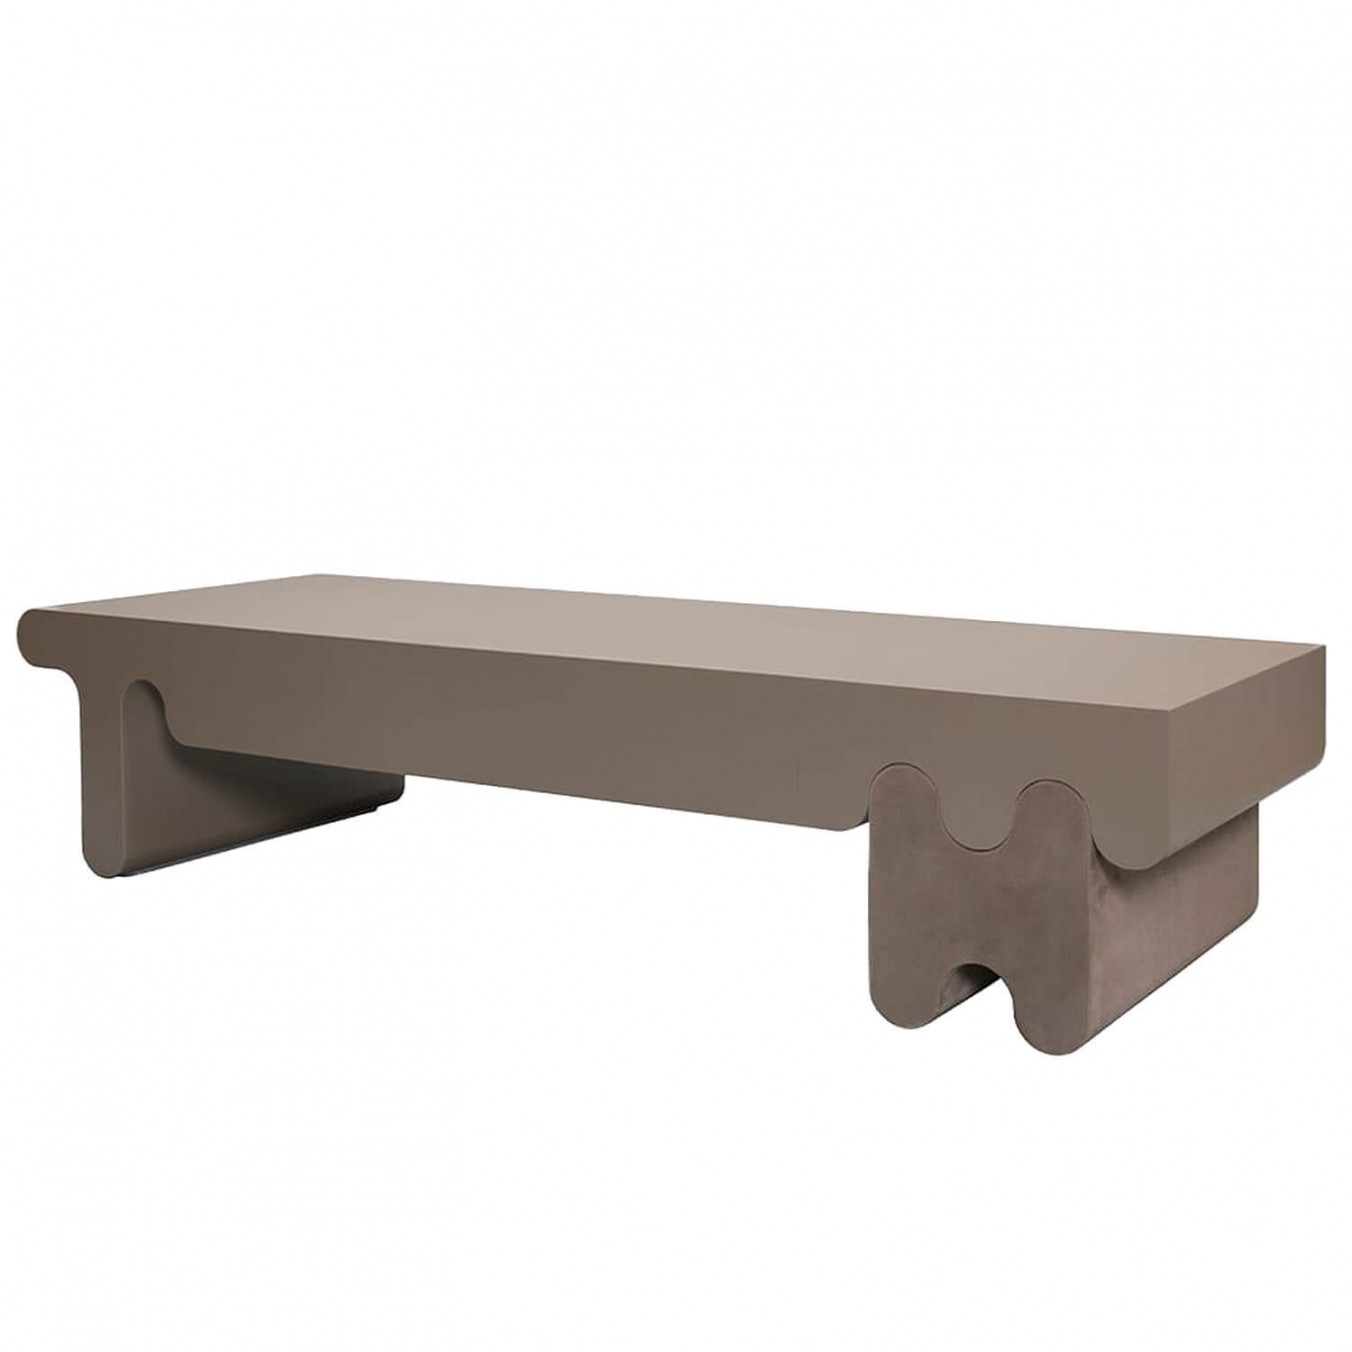 OSSICLE LEATHER COFFEE TABLE